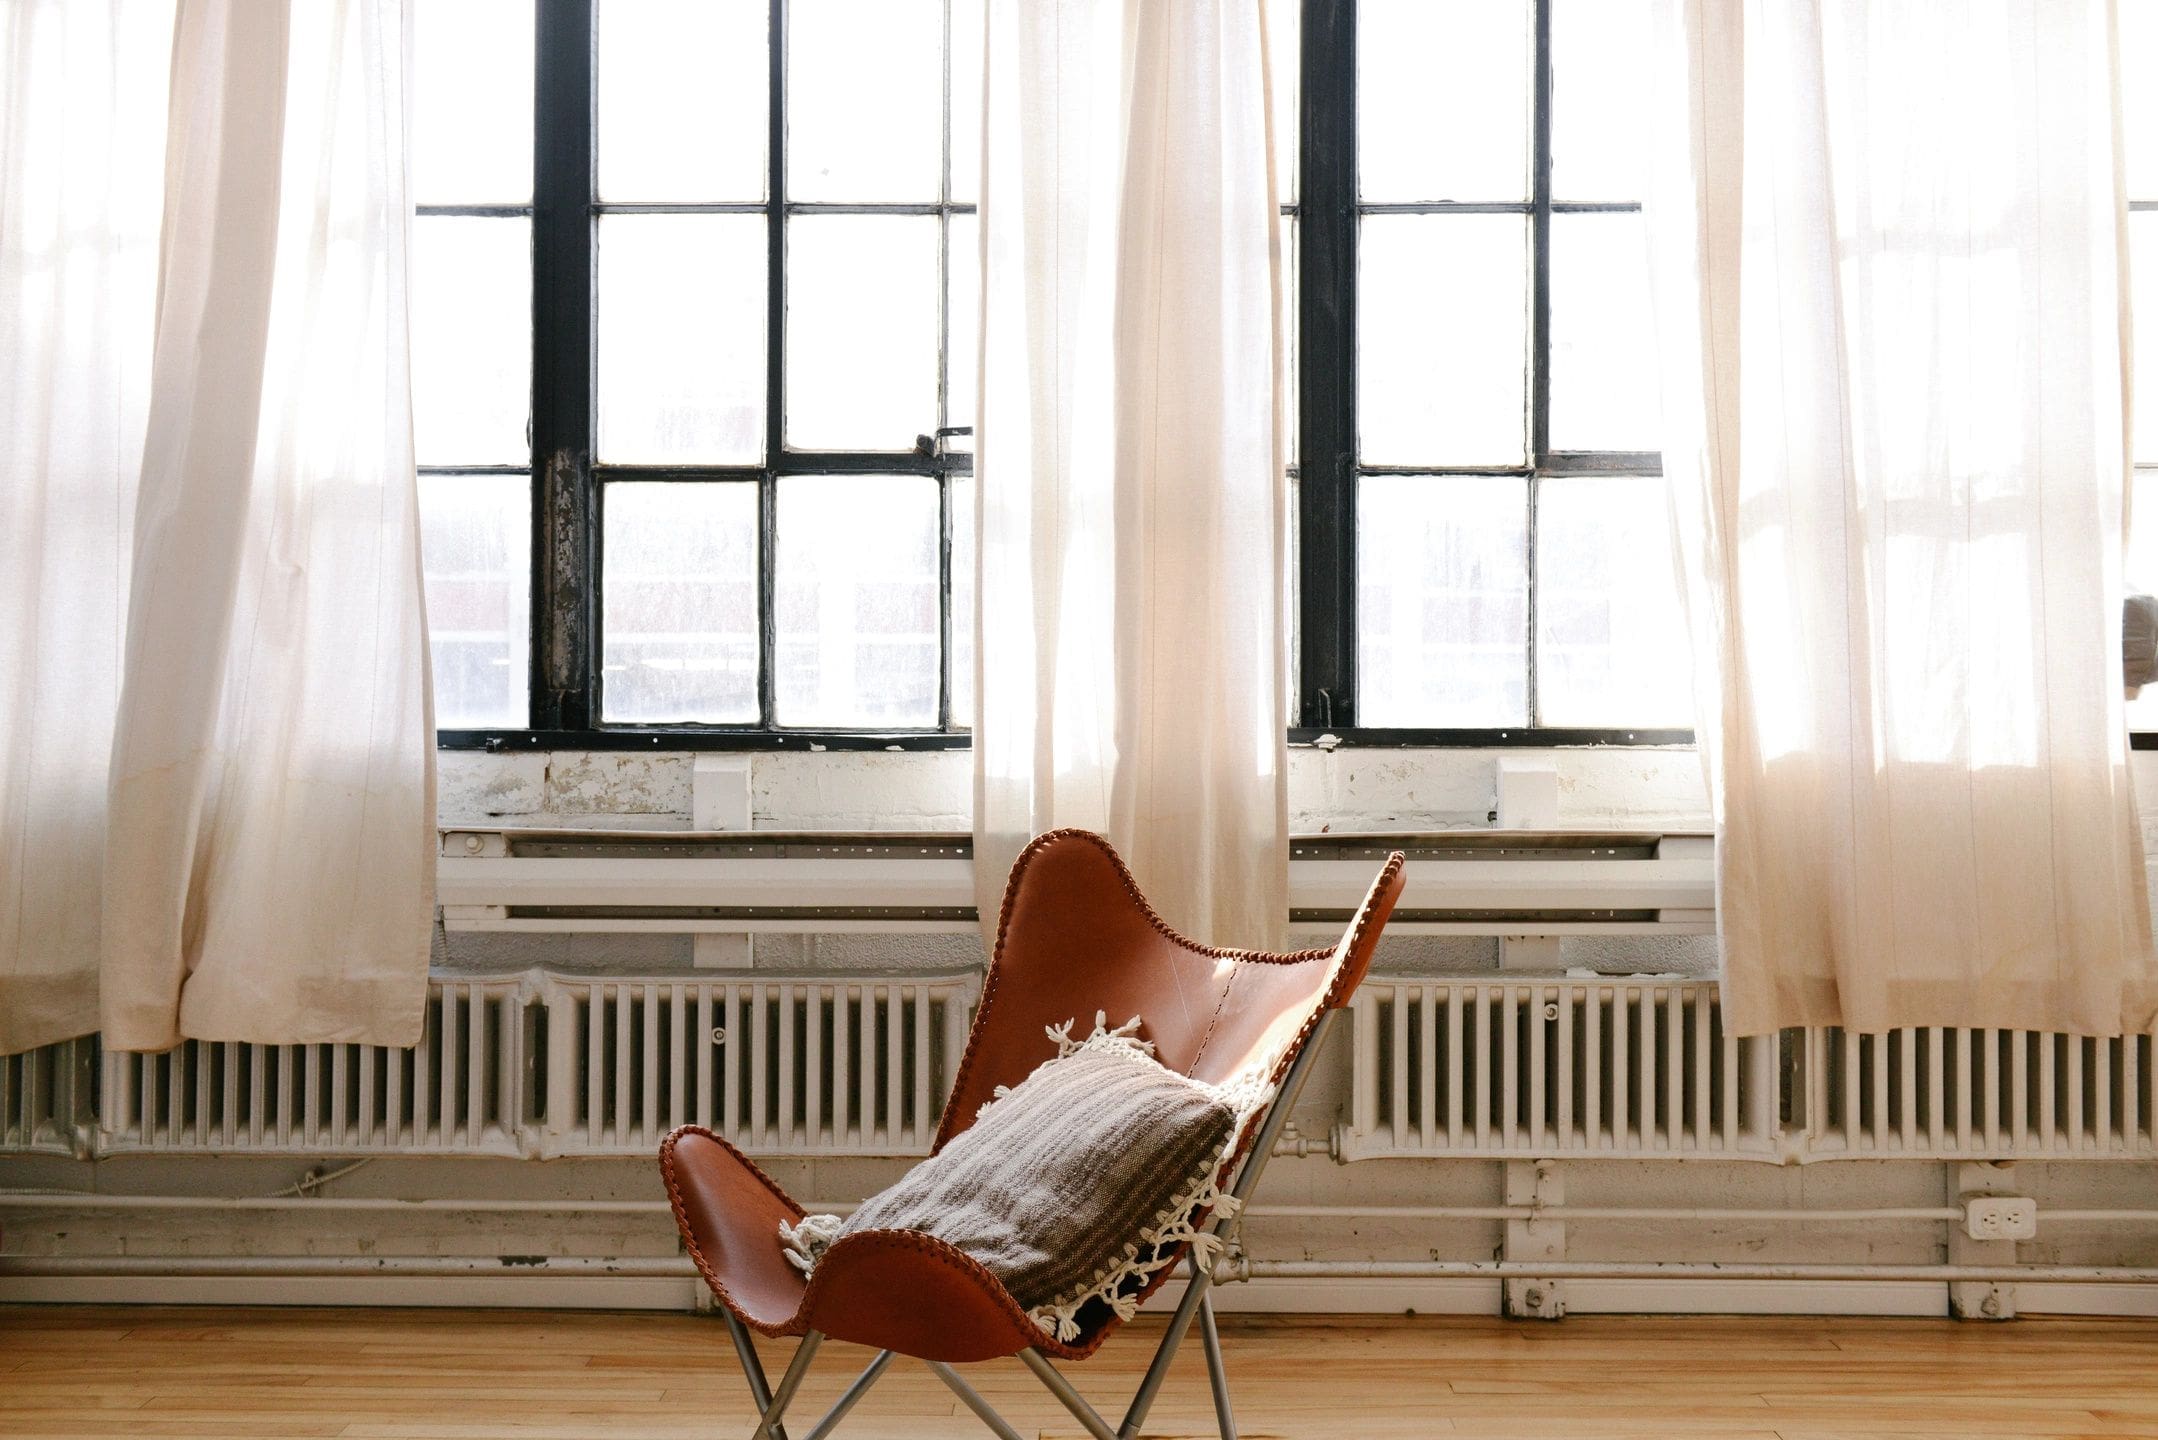 Chair in front of open windows